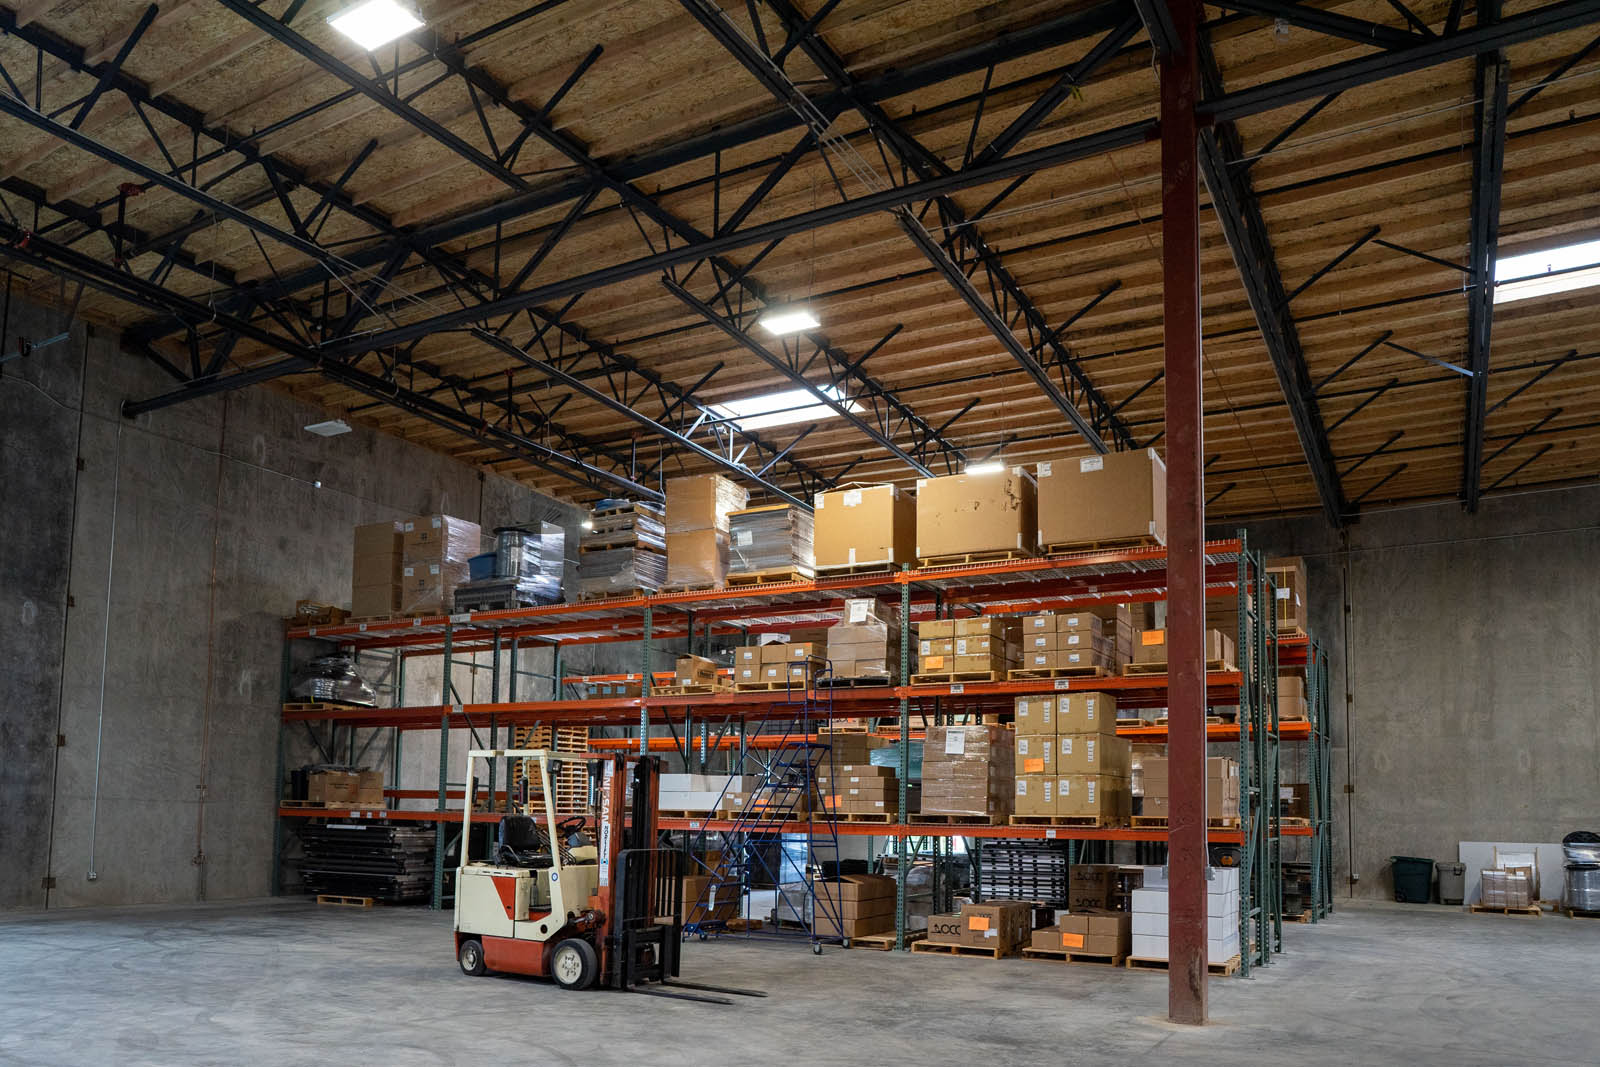 forklift in front of boxes on shelves in warehouse facility